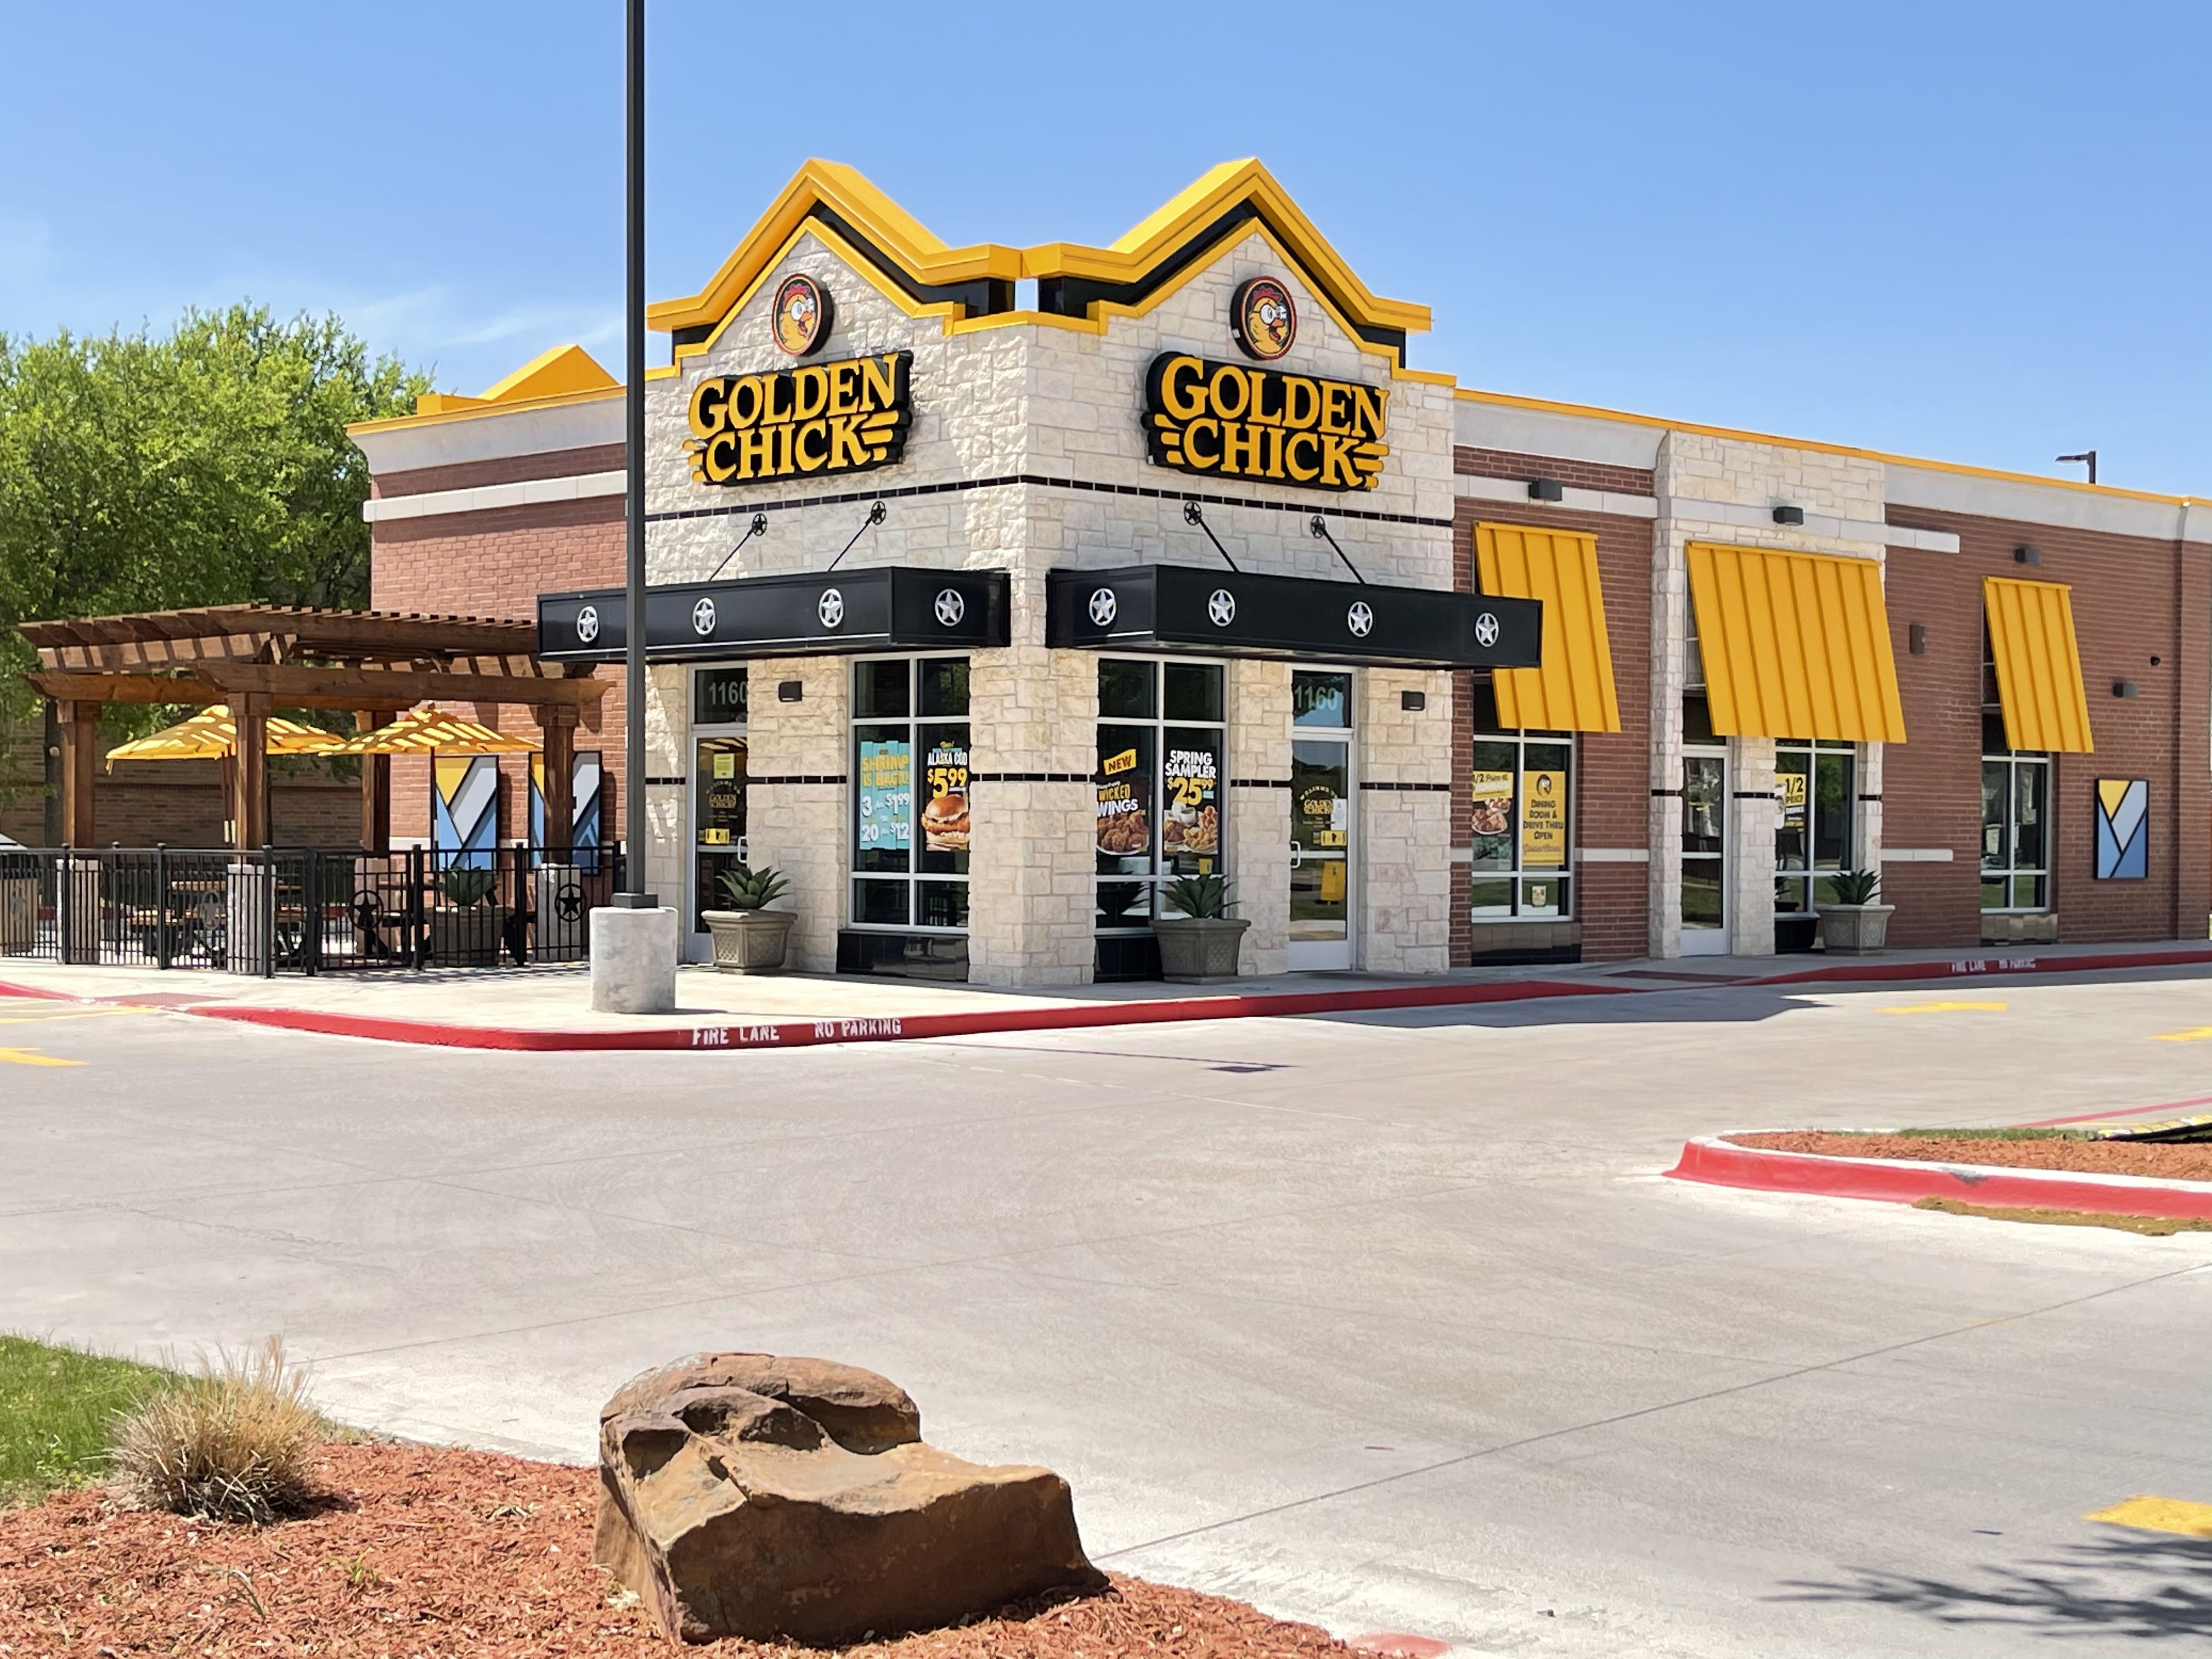 Golden Chick storefront.  Your local Golden Chick fast food restaurant in Granbury, Texas